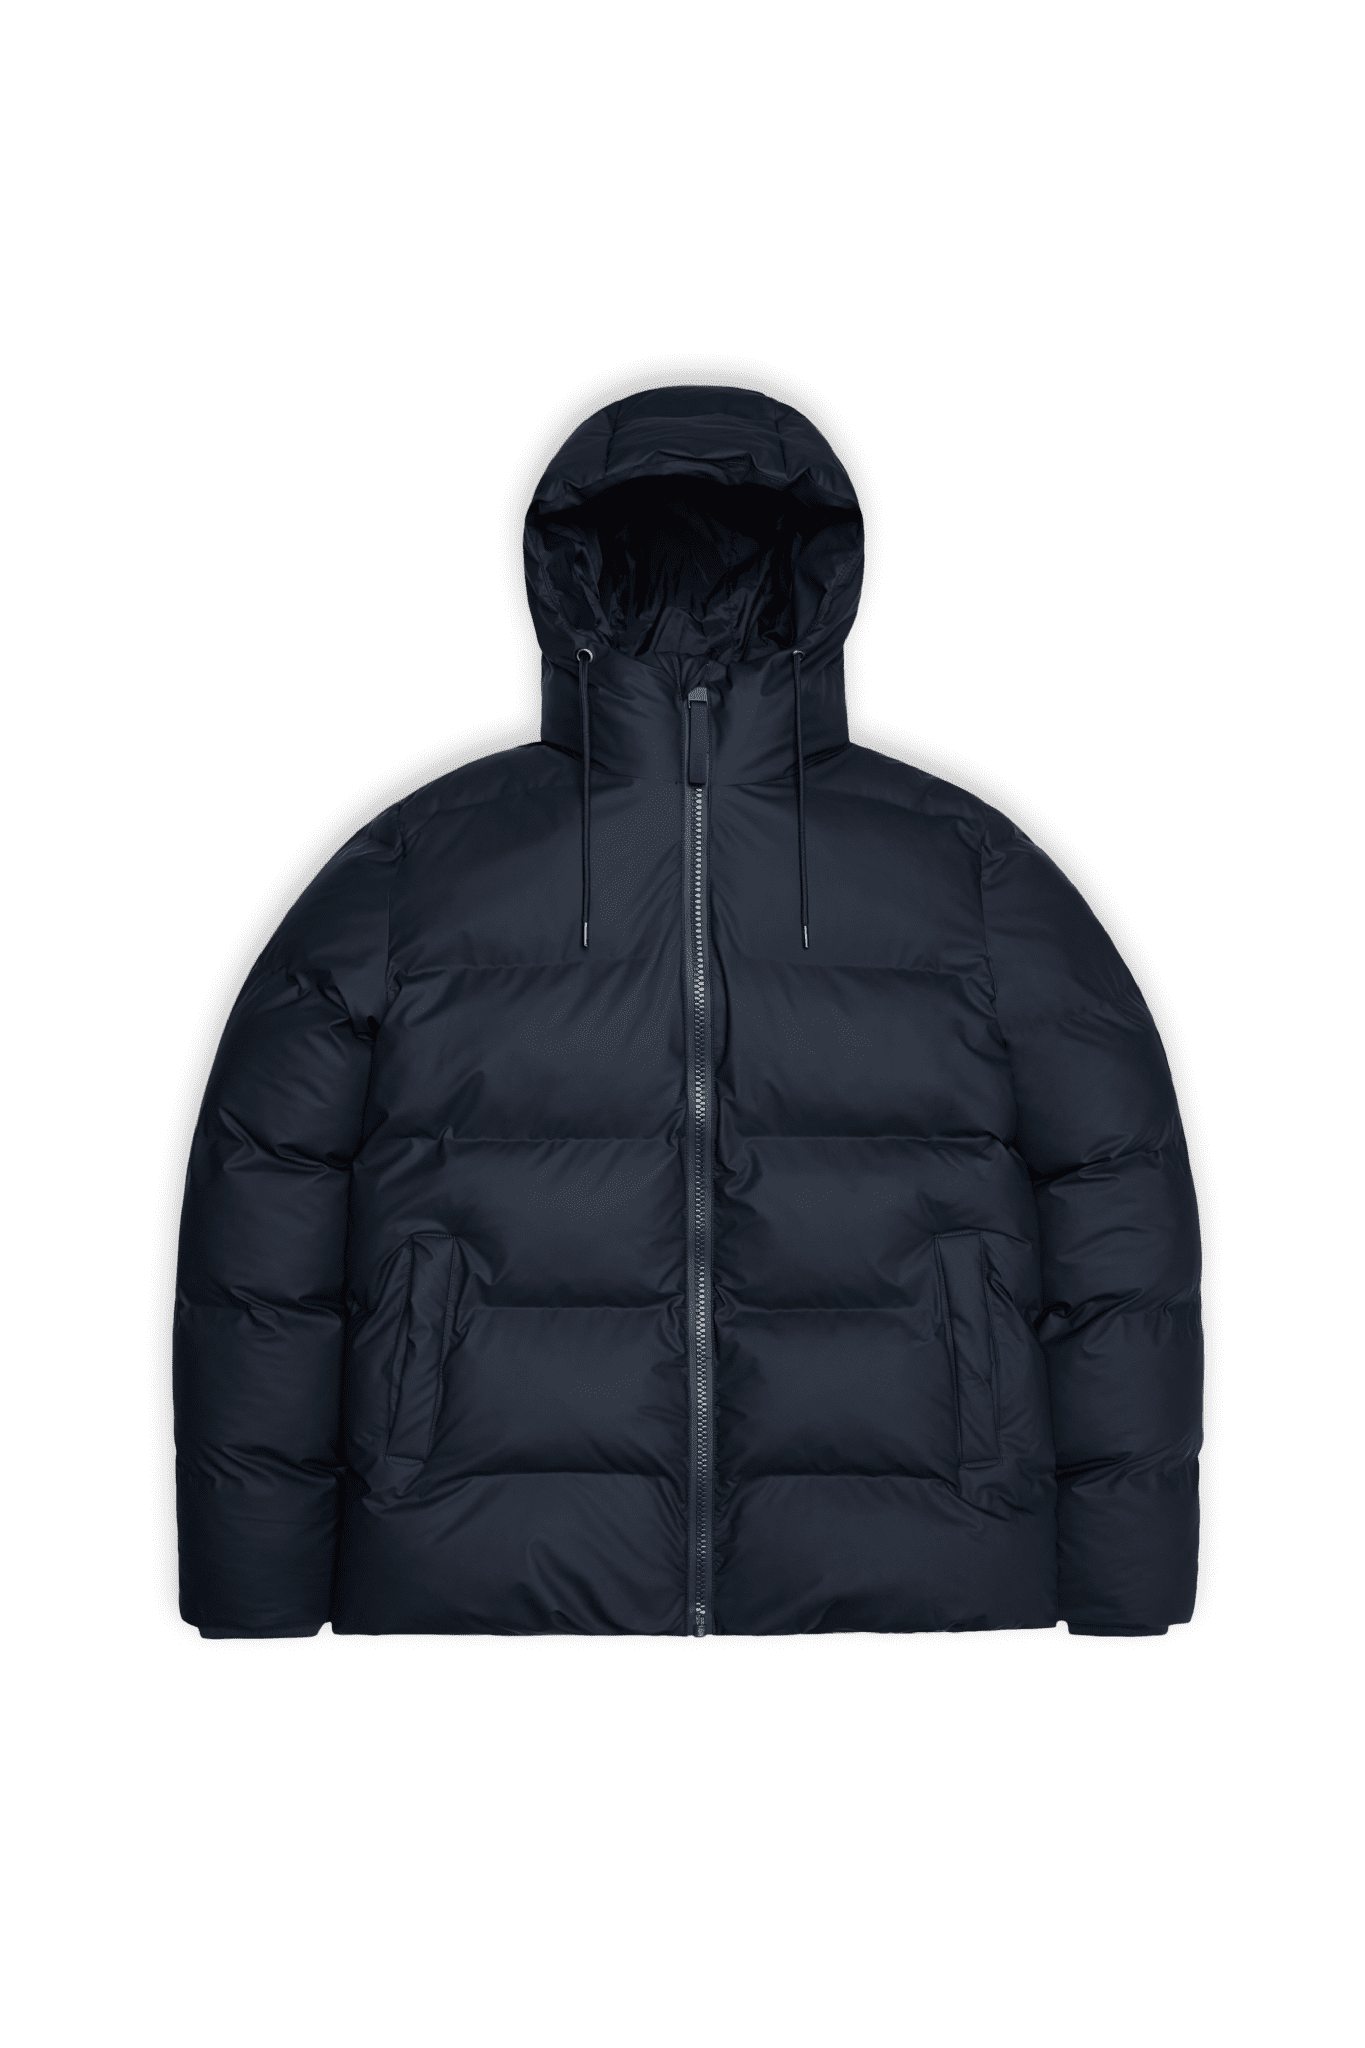 Black Puffer Jacket PNG Image HD - PNG All | PNG All